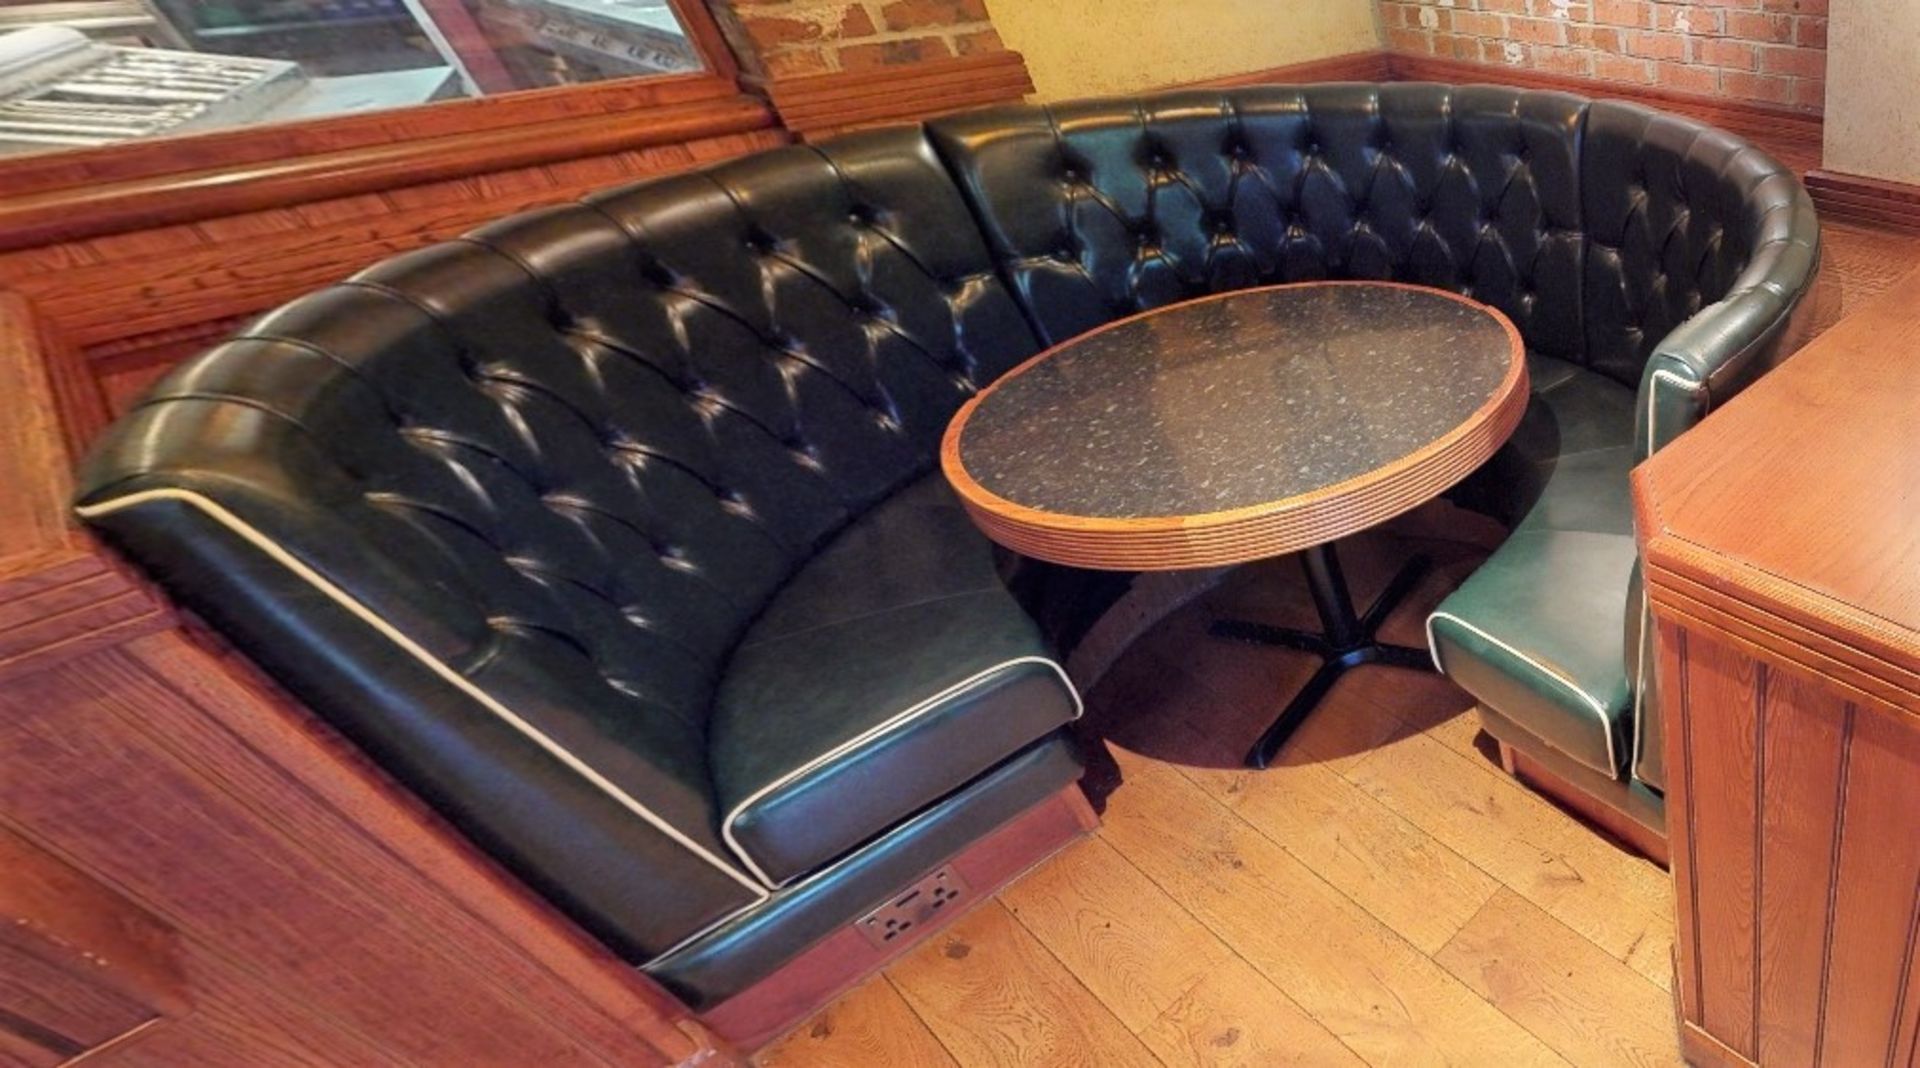 1 x Restaurant C-Shape Seating Booth In Green, With Faux Leather Upholstery With Buttoned High Backs - Image 3 of 3